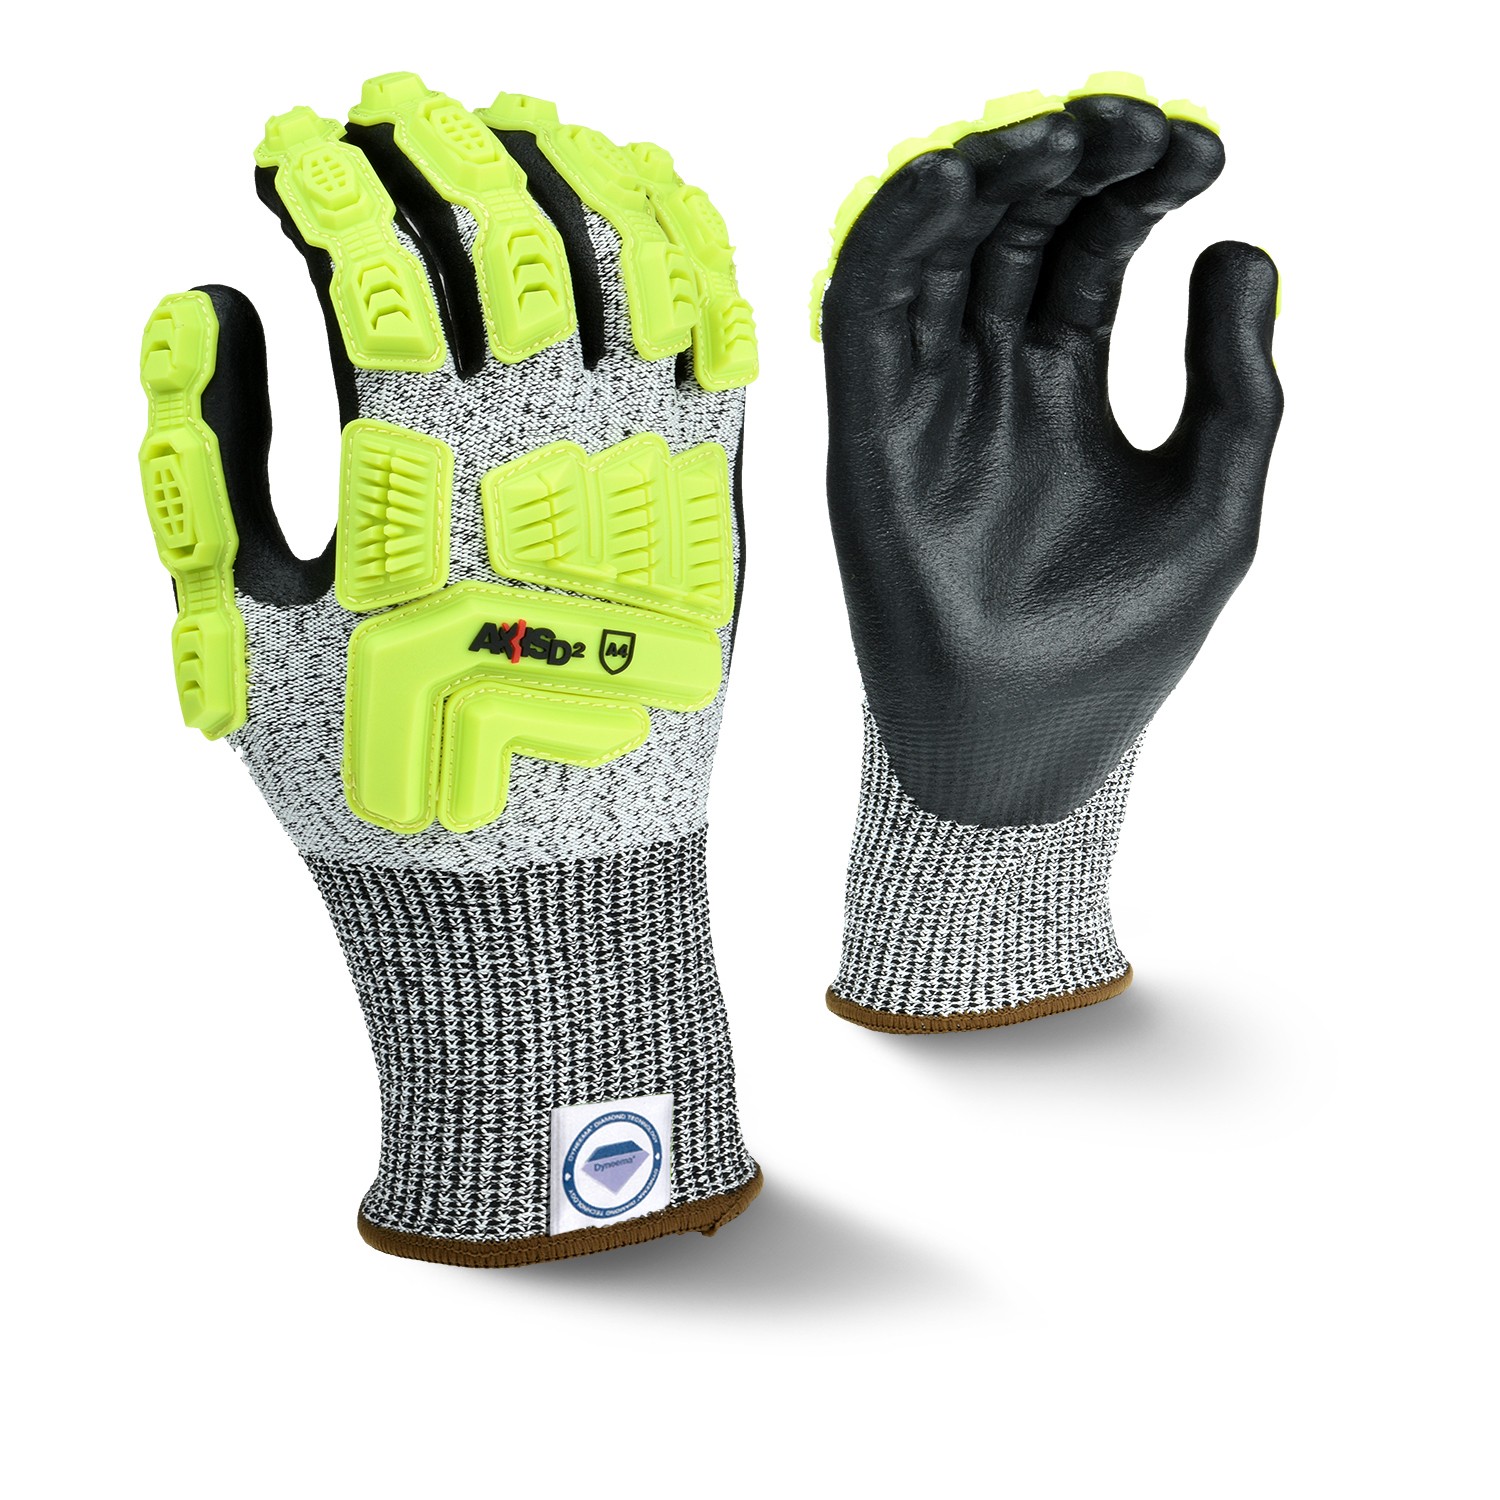 AXIS D2™ Cut Protection Level A4 Glove with Dyneema® Diamond Technology (#RWGD110)